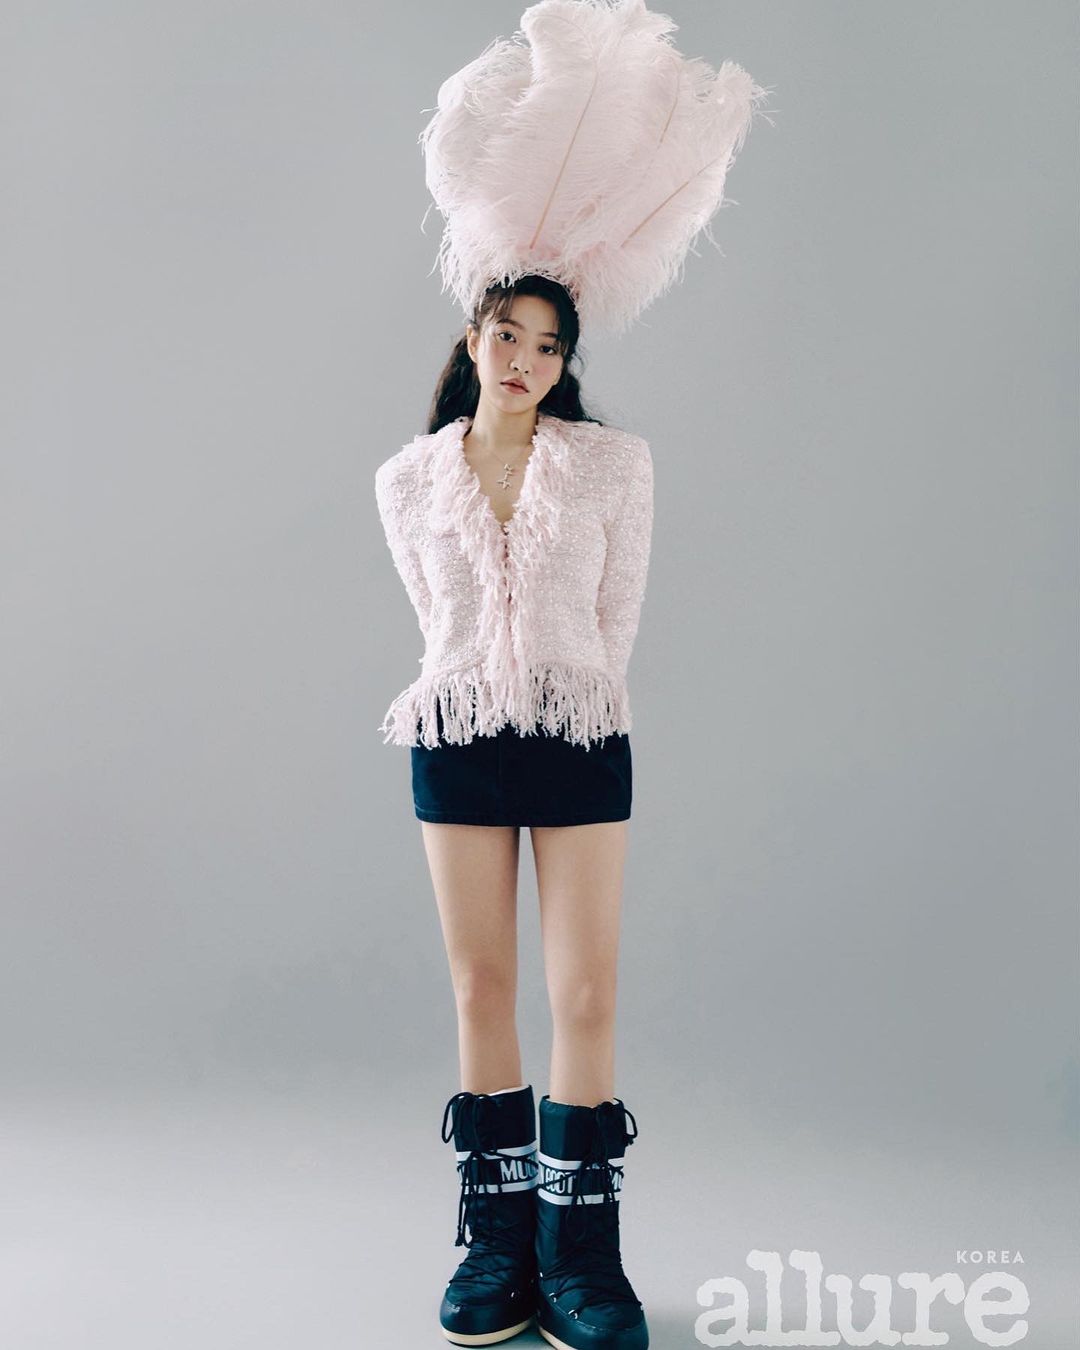 Red Velvet Yeri, wearing a rabbit-reminiscent outfit ahead of the year of the cat in 2023.."My year has finally come"